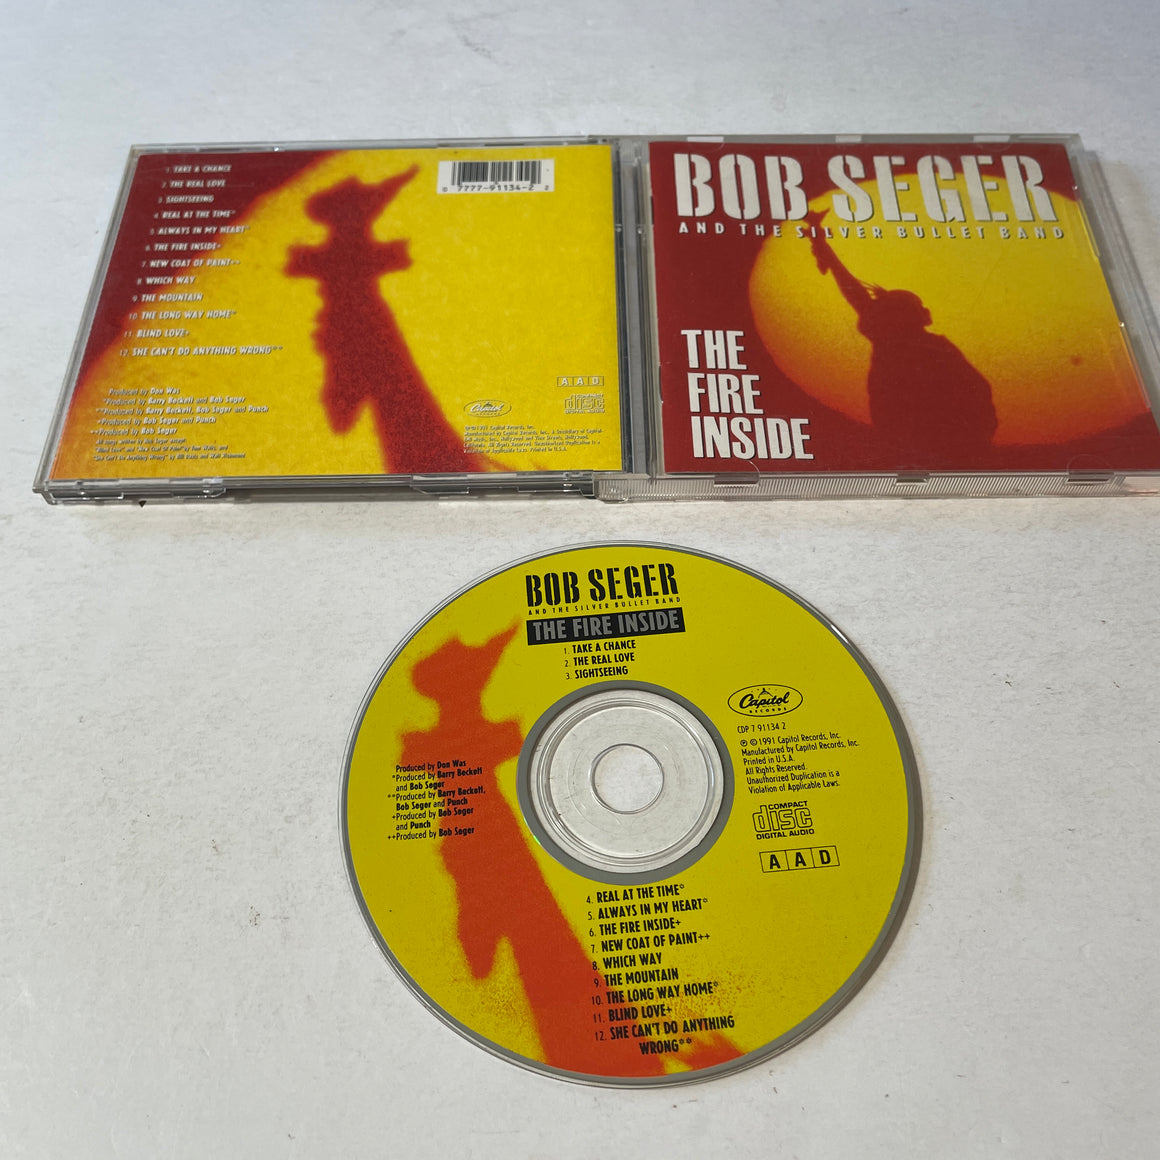 Bob Seger And The Silver Bullet Band The Fire Inside Used CD VG+\VG+